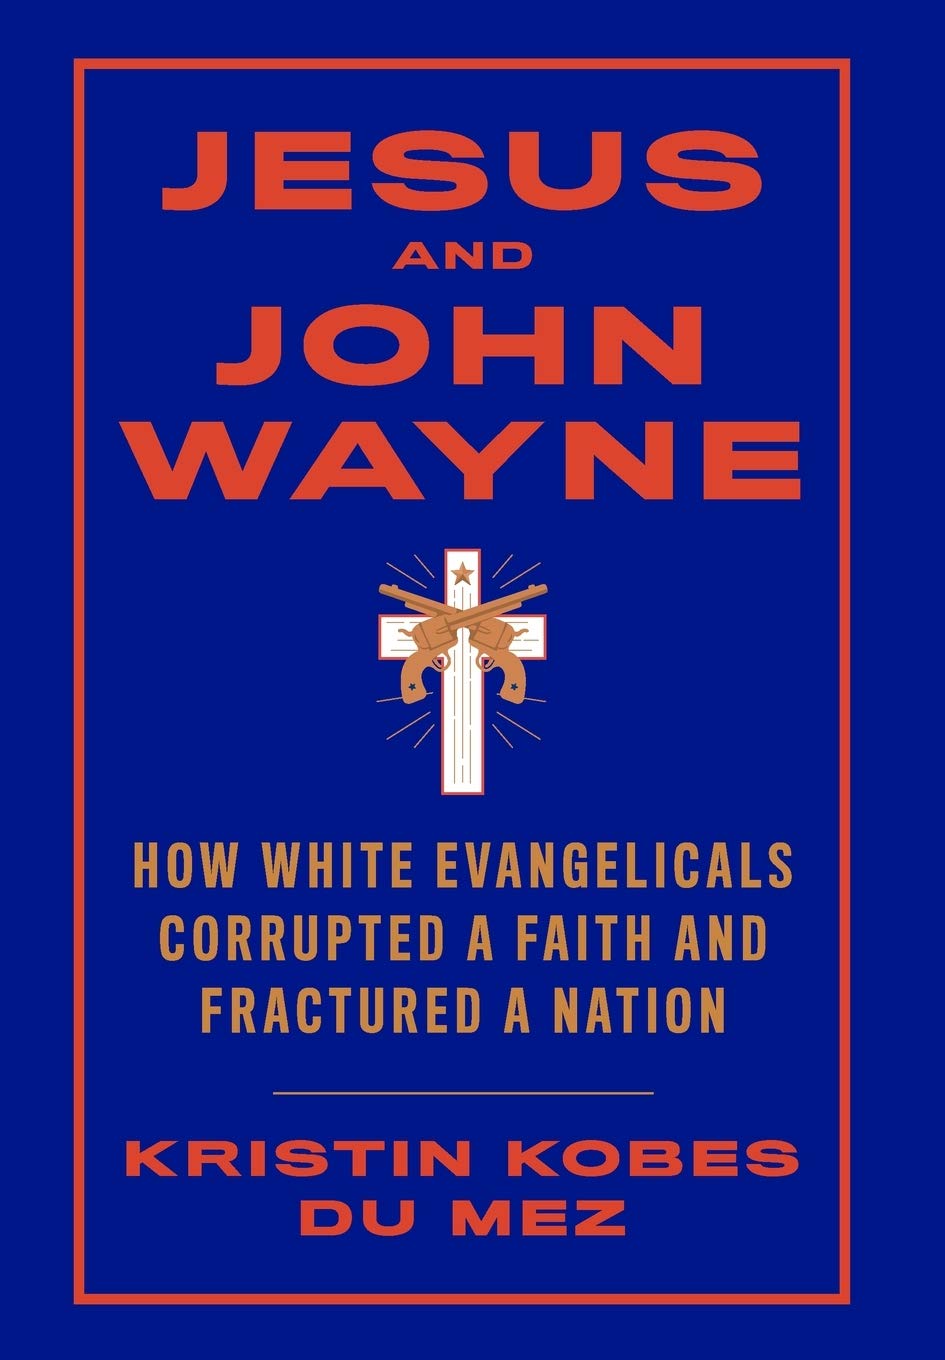 Jesus and John Wayne: How White Evangelicals Corrupted a Faith and Fractured a Nation (Paperback)